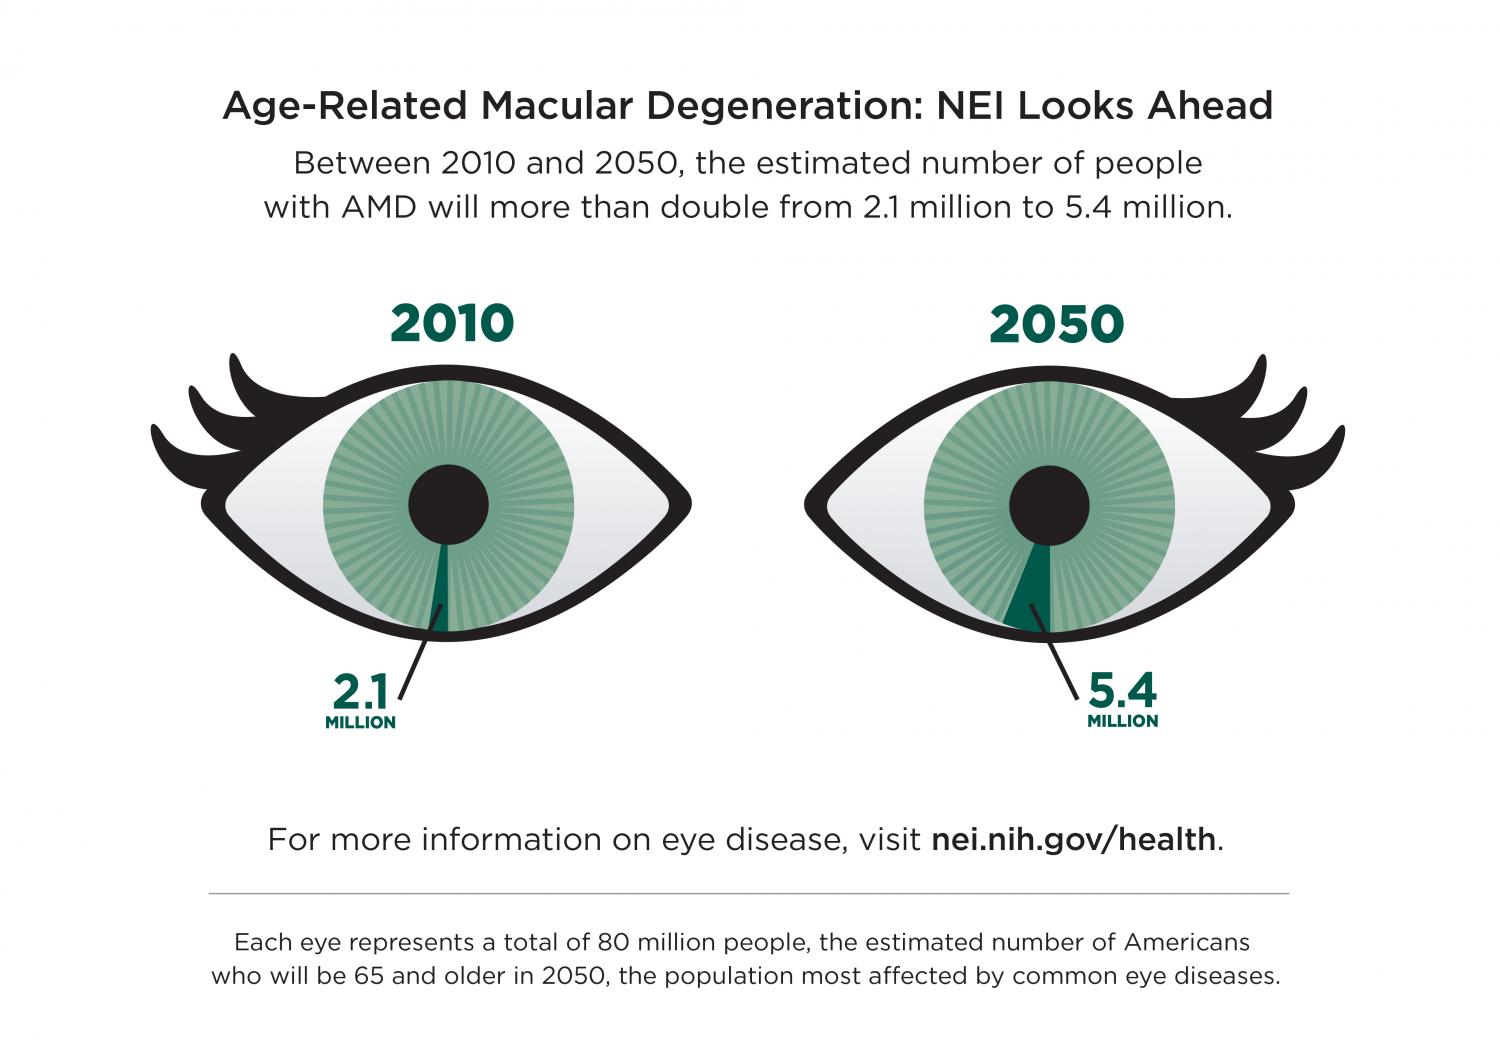 Inflammation-reducing drug shows no benefit for dry age-related macular  degeneration in NIH trial